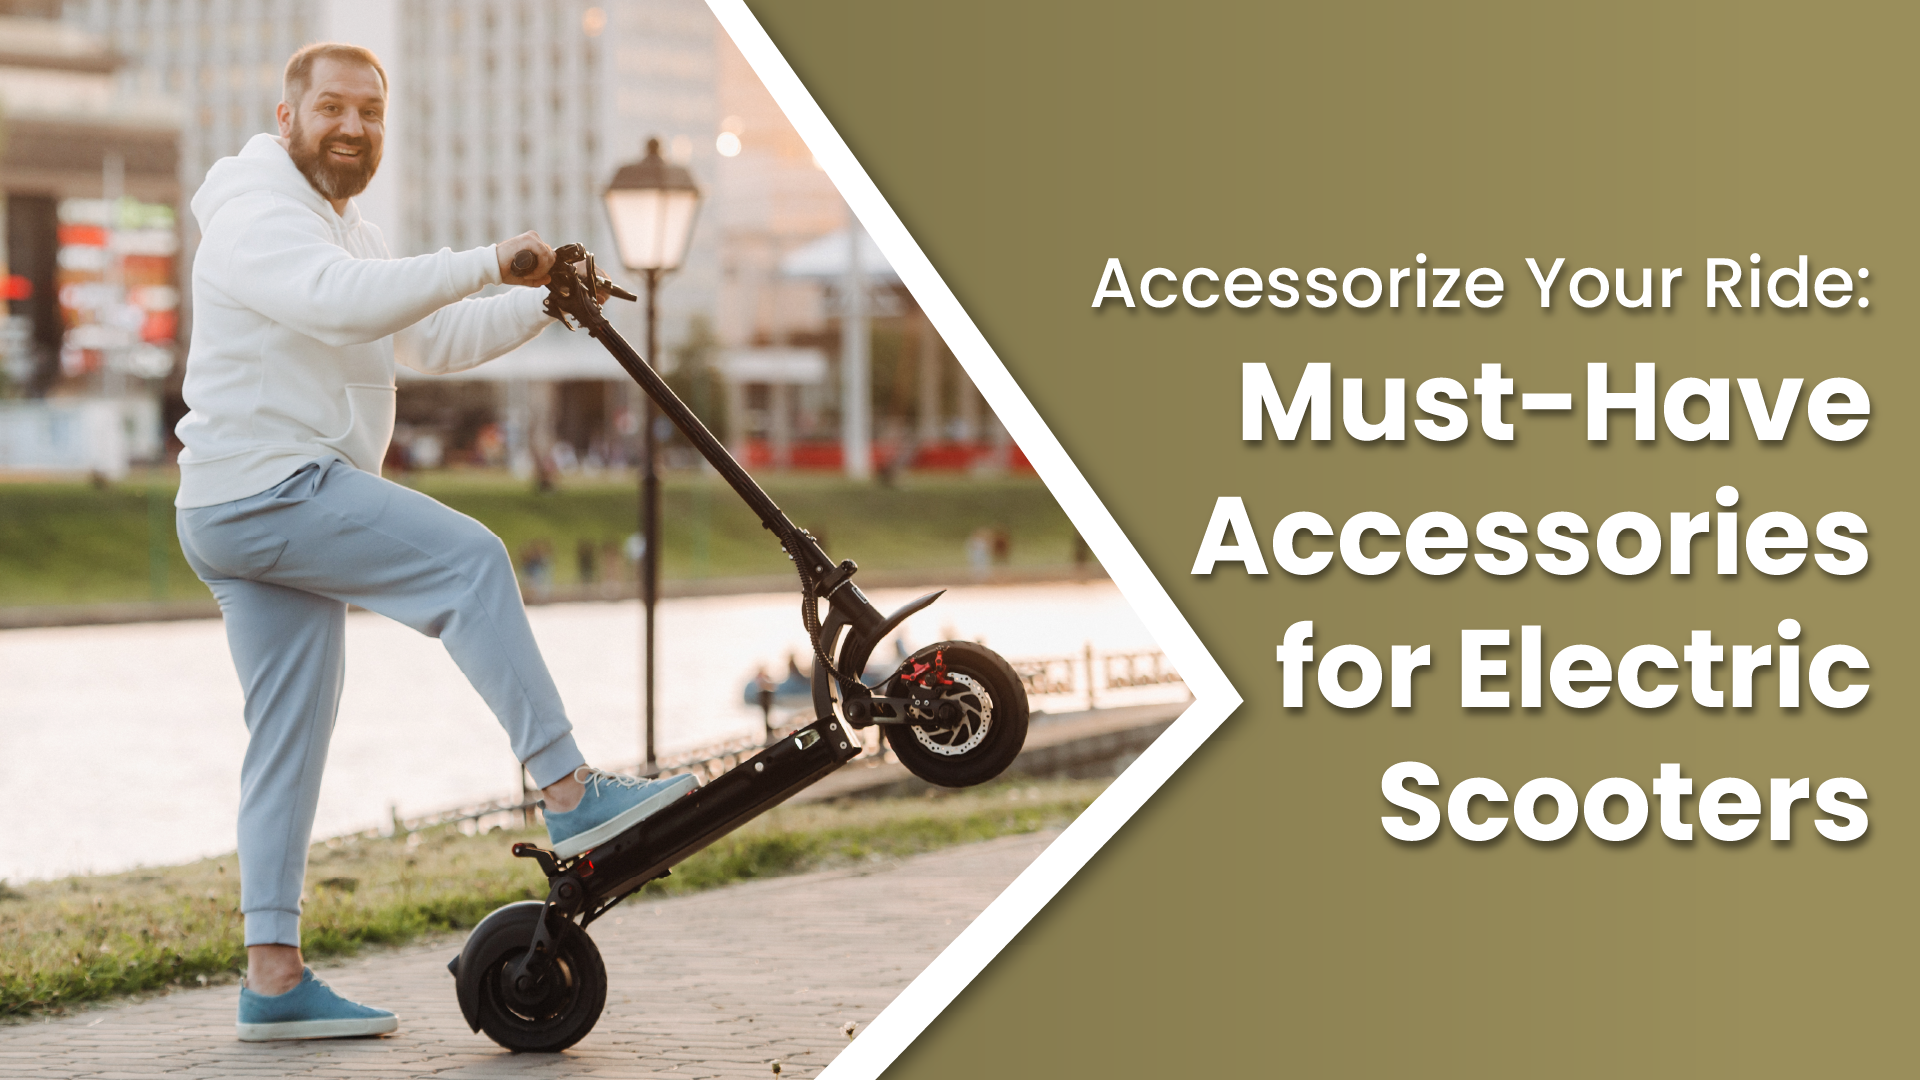 Accessorize Your Ride: Must-Have Accessories for Electric Scooters